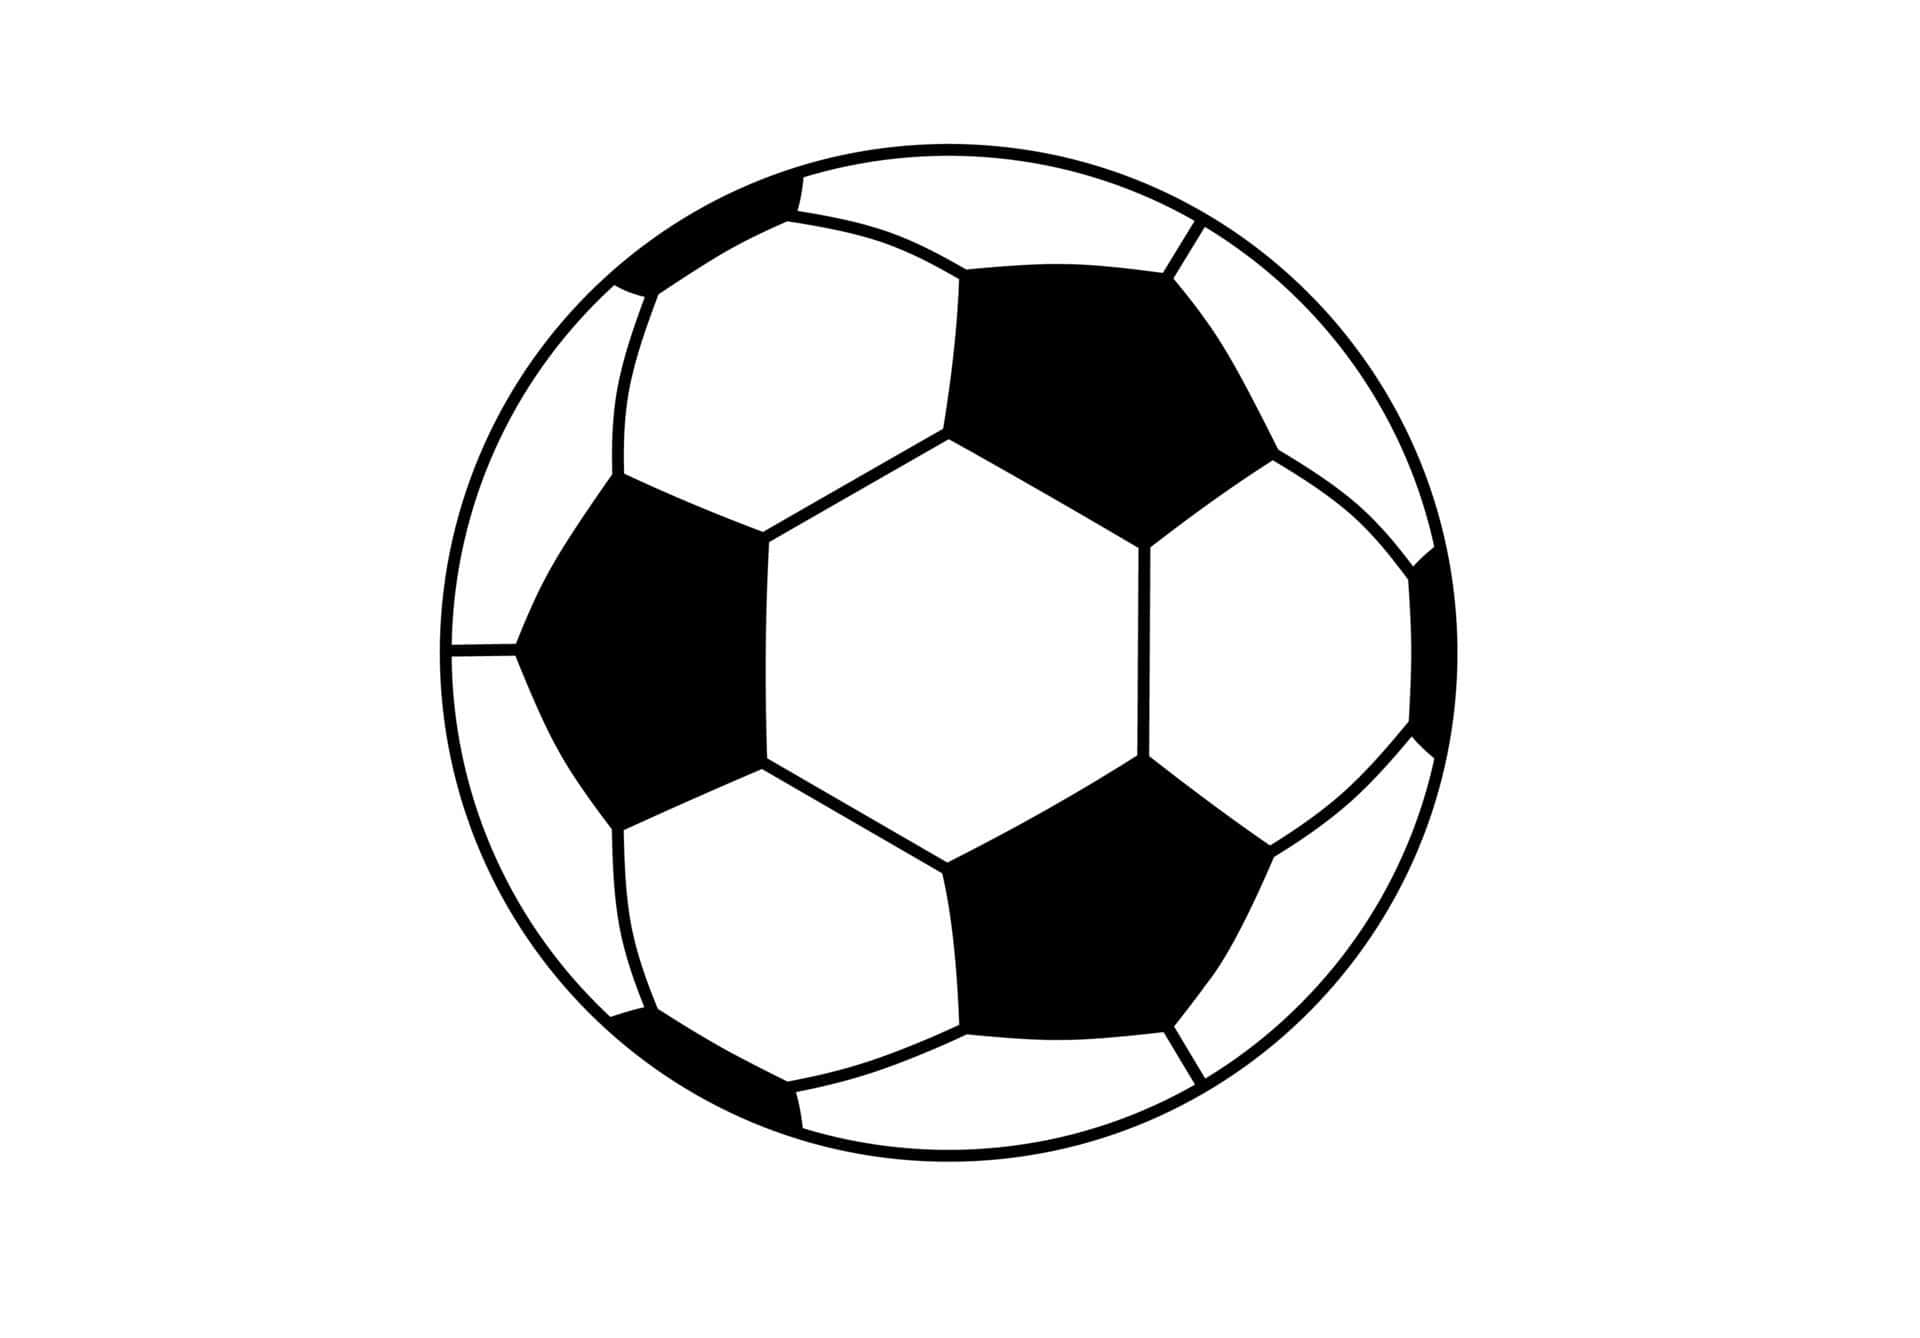 A ball with a checkered pattern against a black background